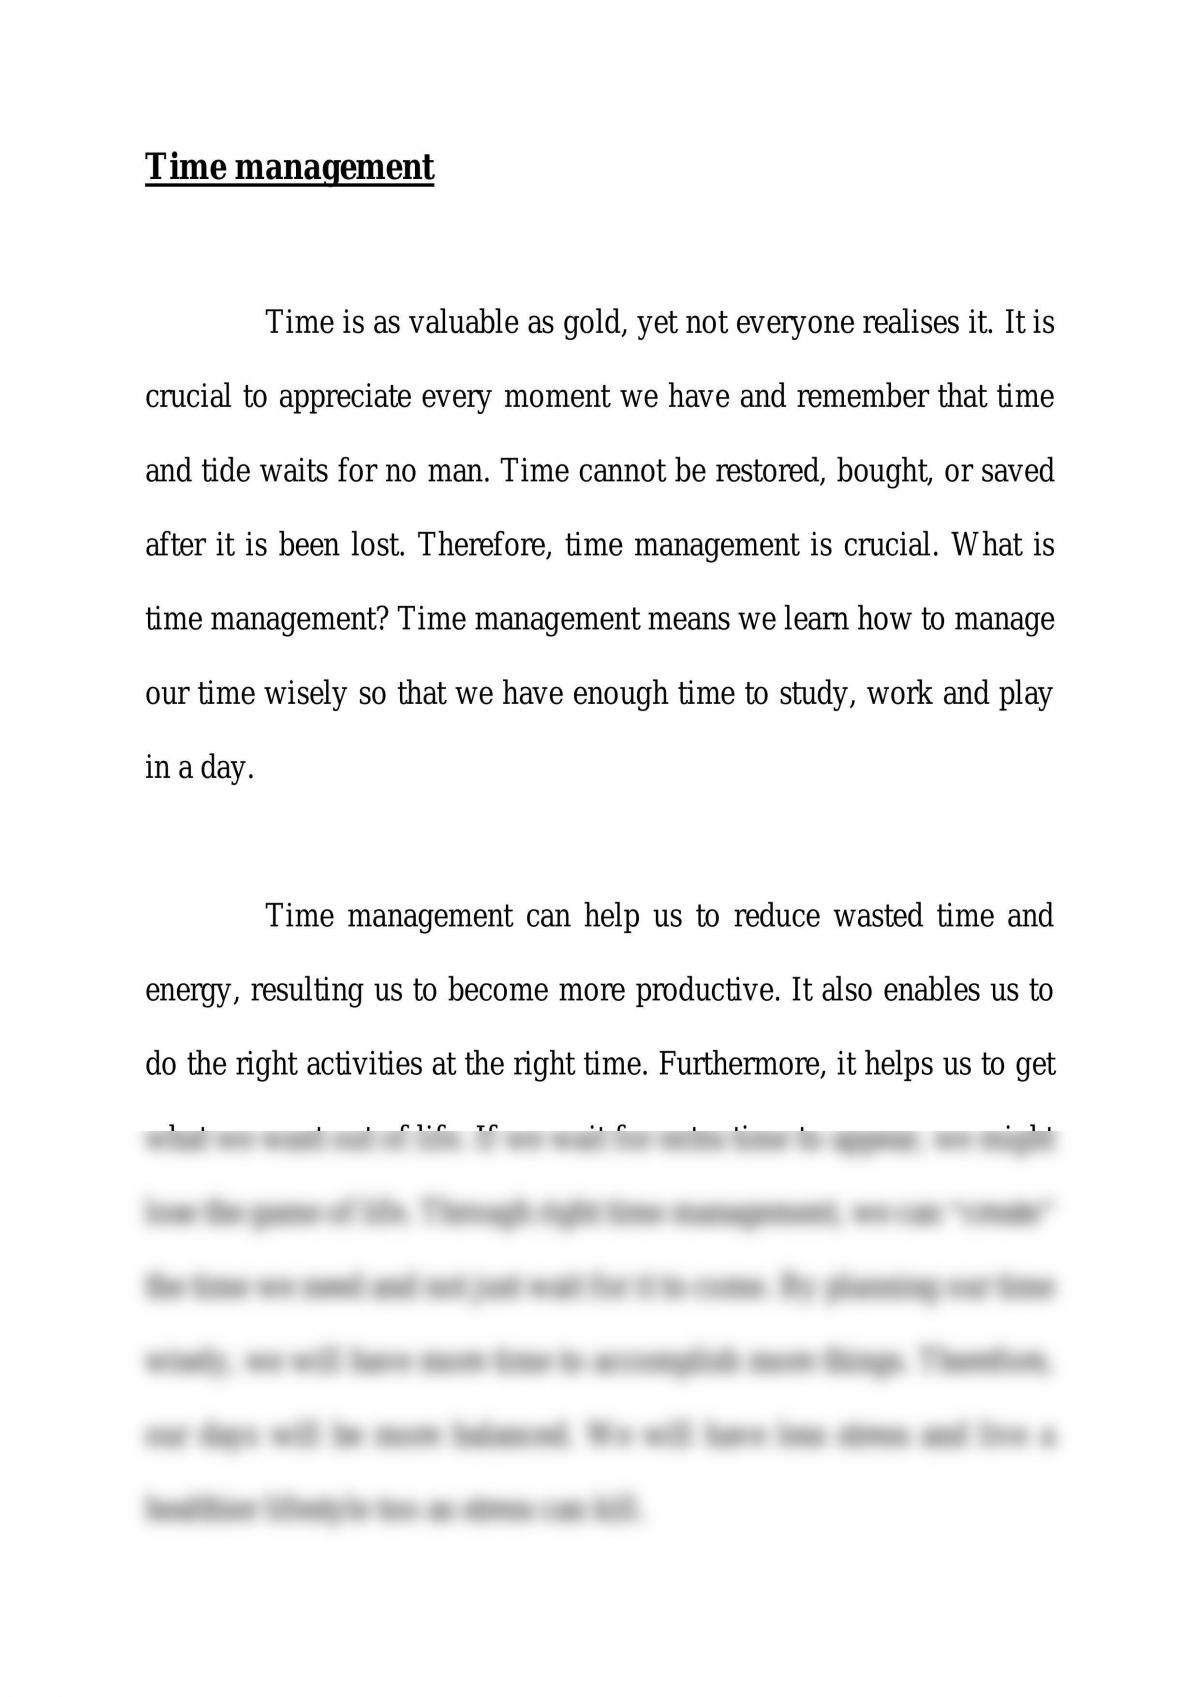 english essay on time management